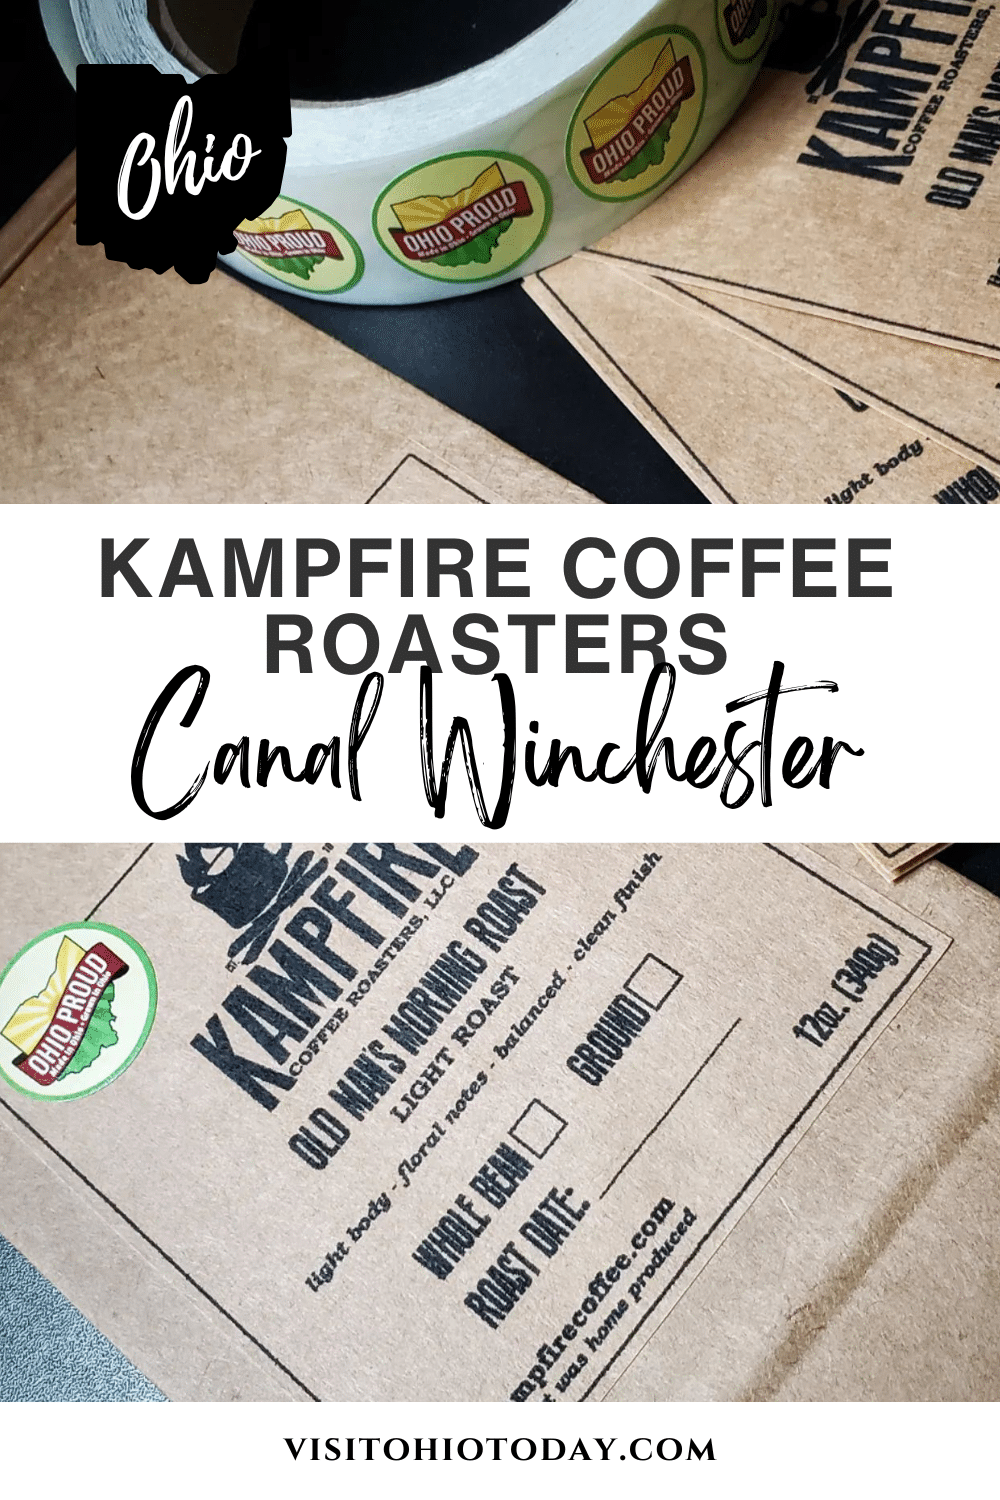 Kampfire Coffee Roasters is a home-roasting company, owned and run by Jesse Mohler, currently operating out of Canal Winchester.